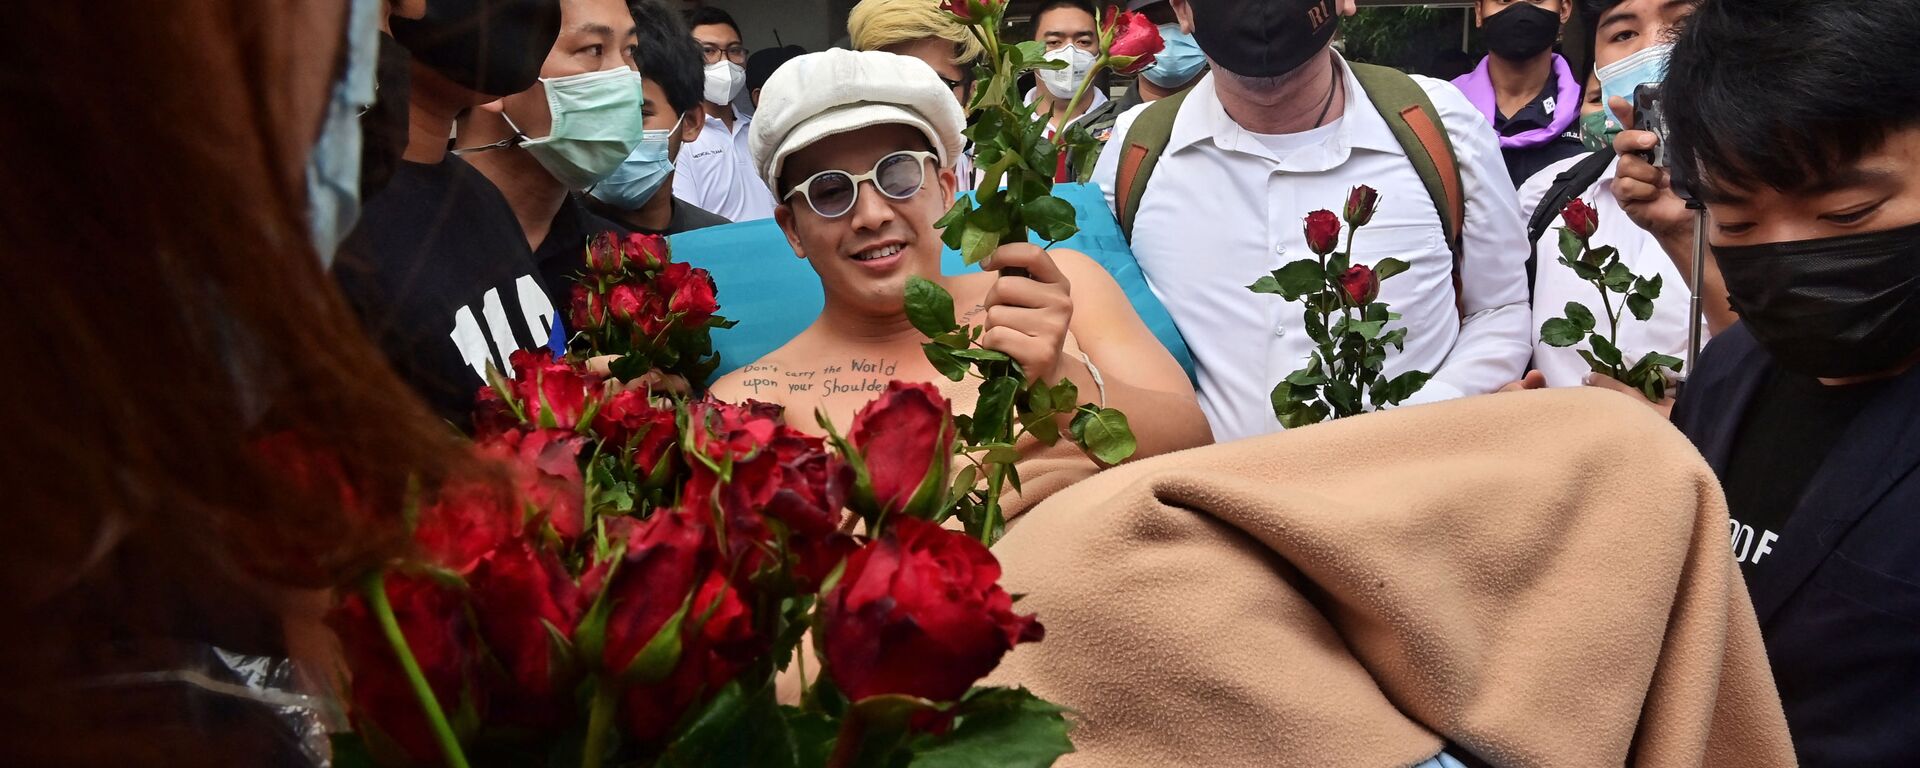 Anti-government blues musician Ammy The Bottom Blues receives flowers as he is wheeled on a hospital bed outside the Office of the Attorney General in Bangkok on February 17, 2021, before the state prosecutor decided whether to indict 18 activists on charges including sedition and lese majeste related to anti-government protests in 2020. - Sputnik International, 1920, 03.03.2021